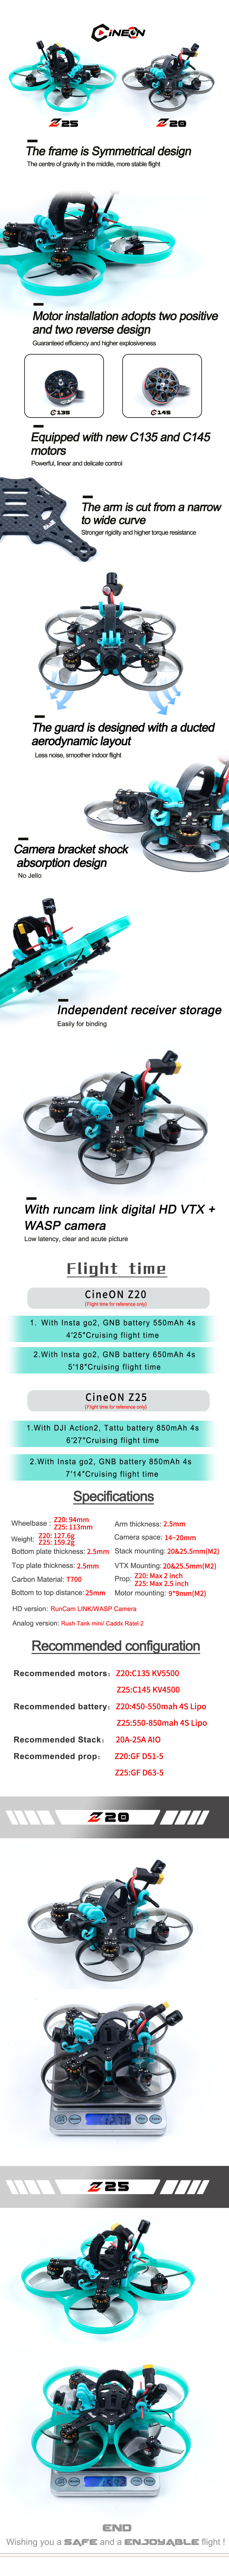 Axisflying cineon Z20 / 2 inch cinewhoop / sub250g fpv drone -4S HD BNF (Clear Gray) Z20 BNF drone cinematic drone,cinewhoop drone,longrange drone,freestyle drone,fpv drone,fpv quads,3.5" cinematic drone,3.5" cinematic quads,3.5" cinewhoop quads,3"cinewhoop quads,3"cinematic quads,the same as dji quads,2.5" whoop,2.5"cinewhoop,2.5"indoor drone,2.5" frame,sub250g,sub250gfpv,2"cinewhoop,2"indoor drone